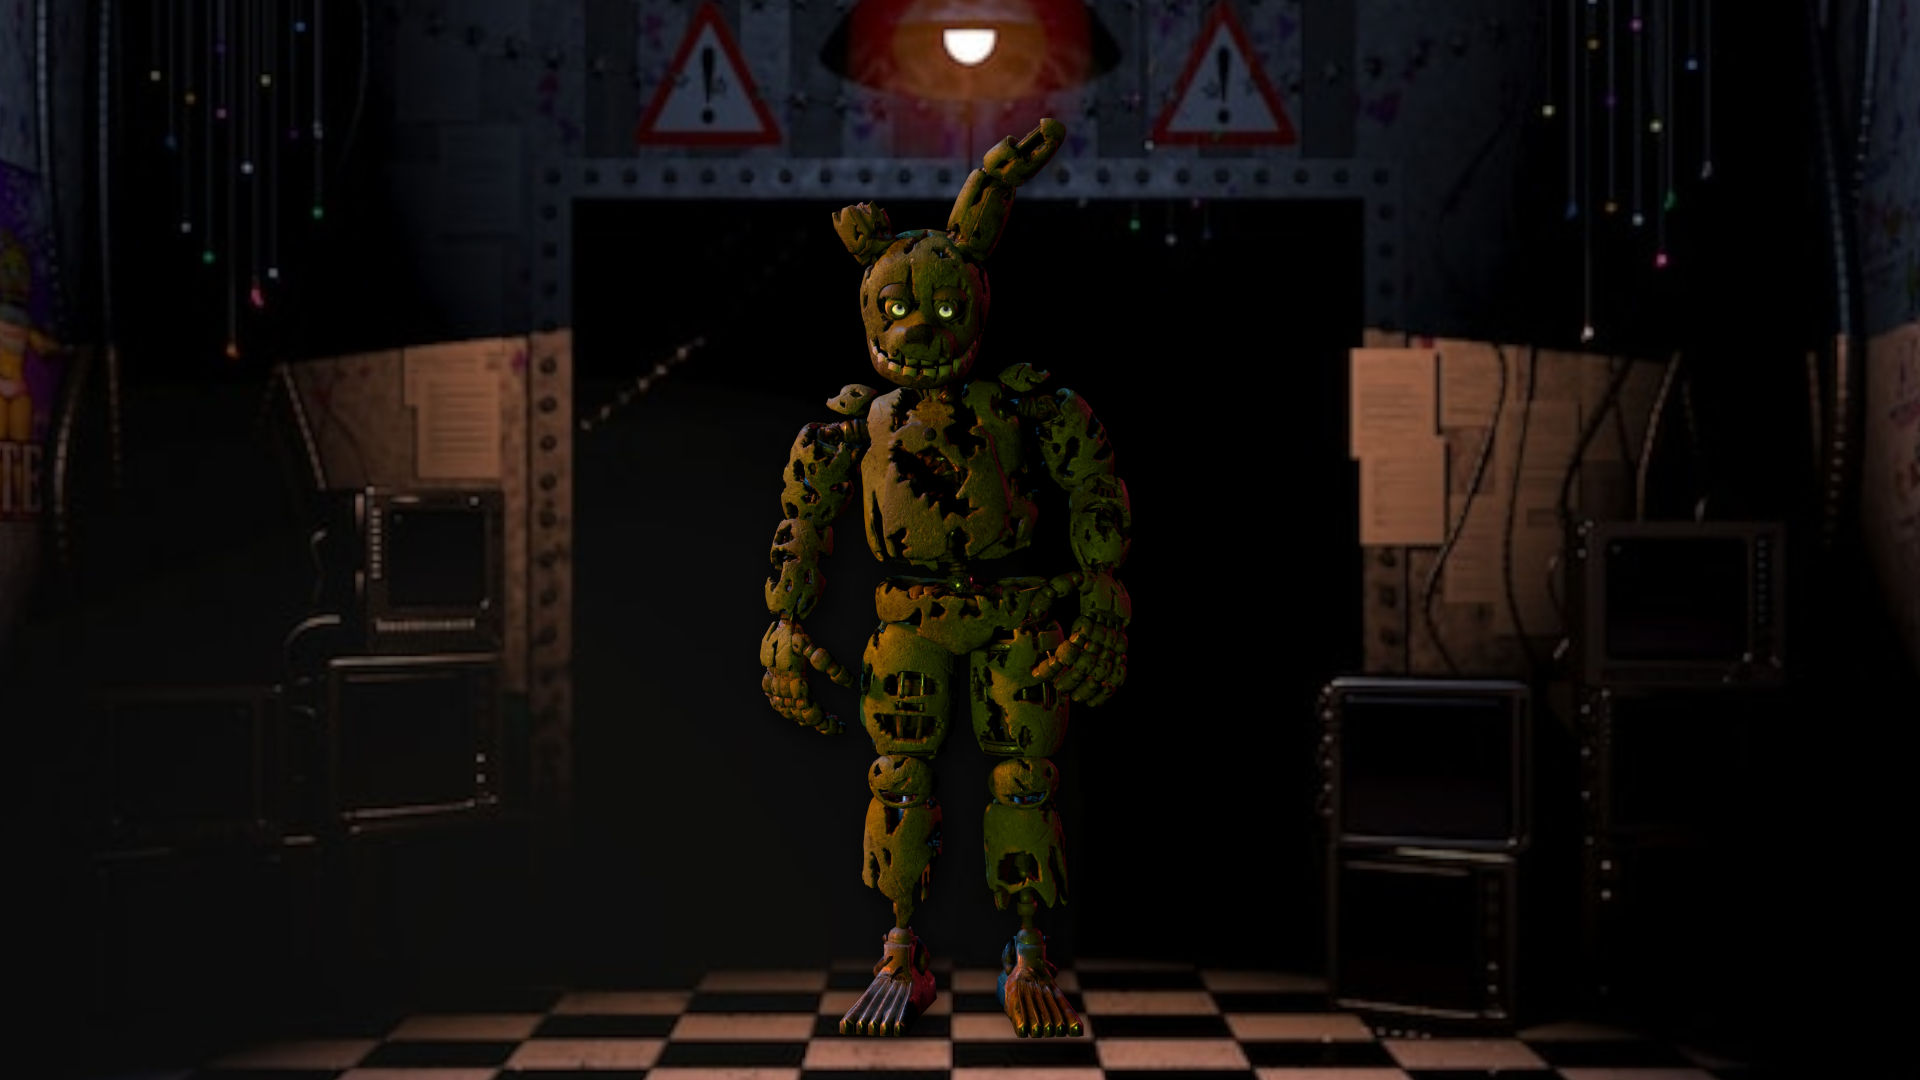 FNAF Movie Confirms What We All Suspected About Springtrap's Origin